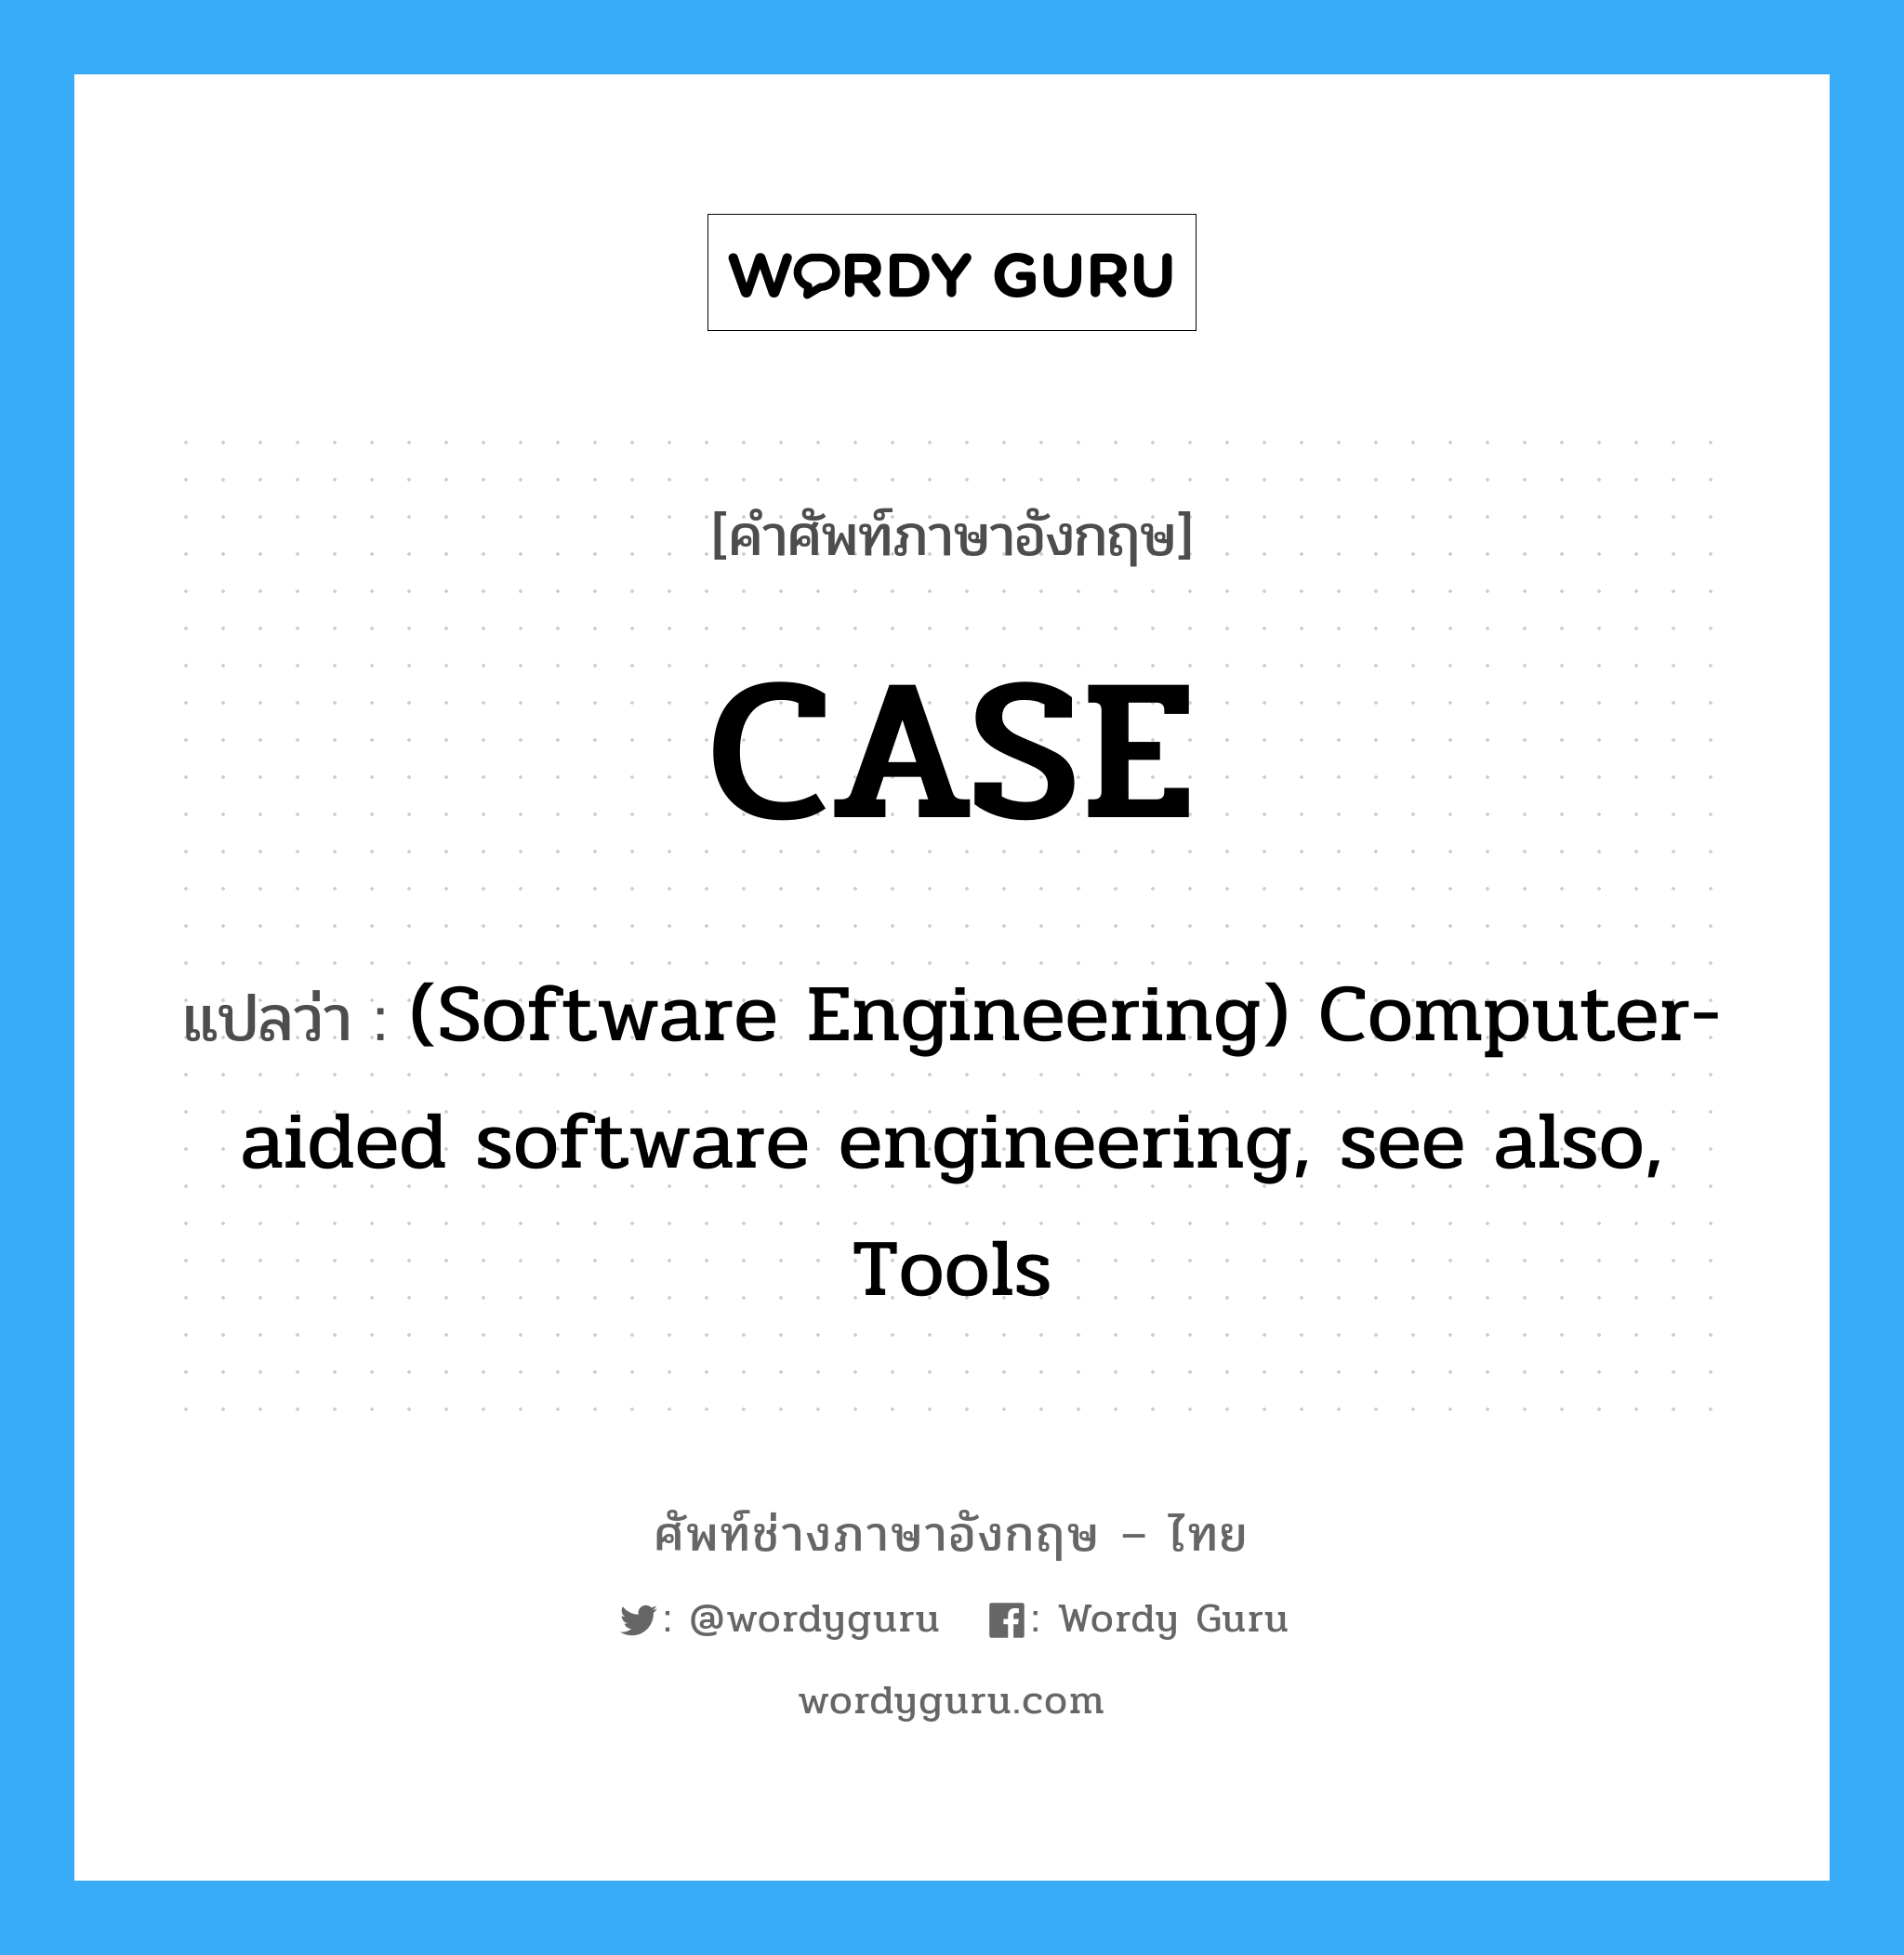 (Software Engineering) Computer-aided software engineering, see also, Tools ภาษาอังกฤษ?, คำศัพท์ช่างภาษาอังกฤษ - ไทย (Software Engineering) Computer-aided software engineering, see also, Tools คำศัพท์ภาษาอังกฤษ (Software Engineering) Computer-aided software engineering, see also, Tools แปลว่า CASE